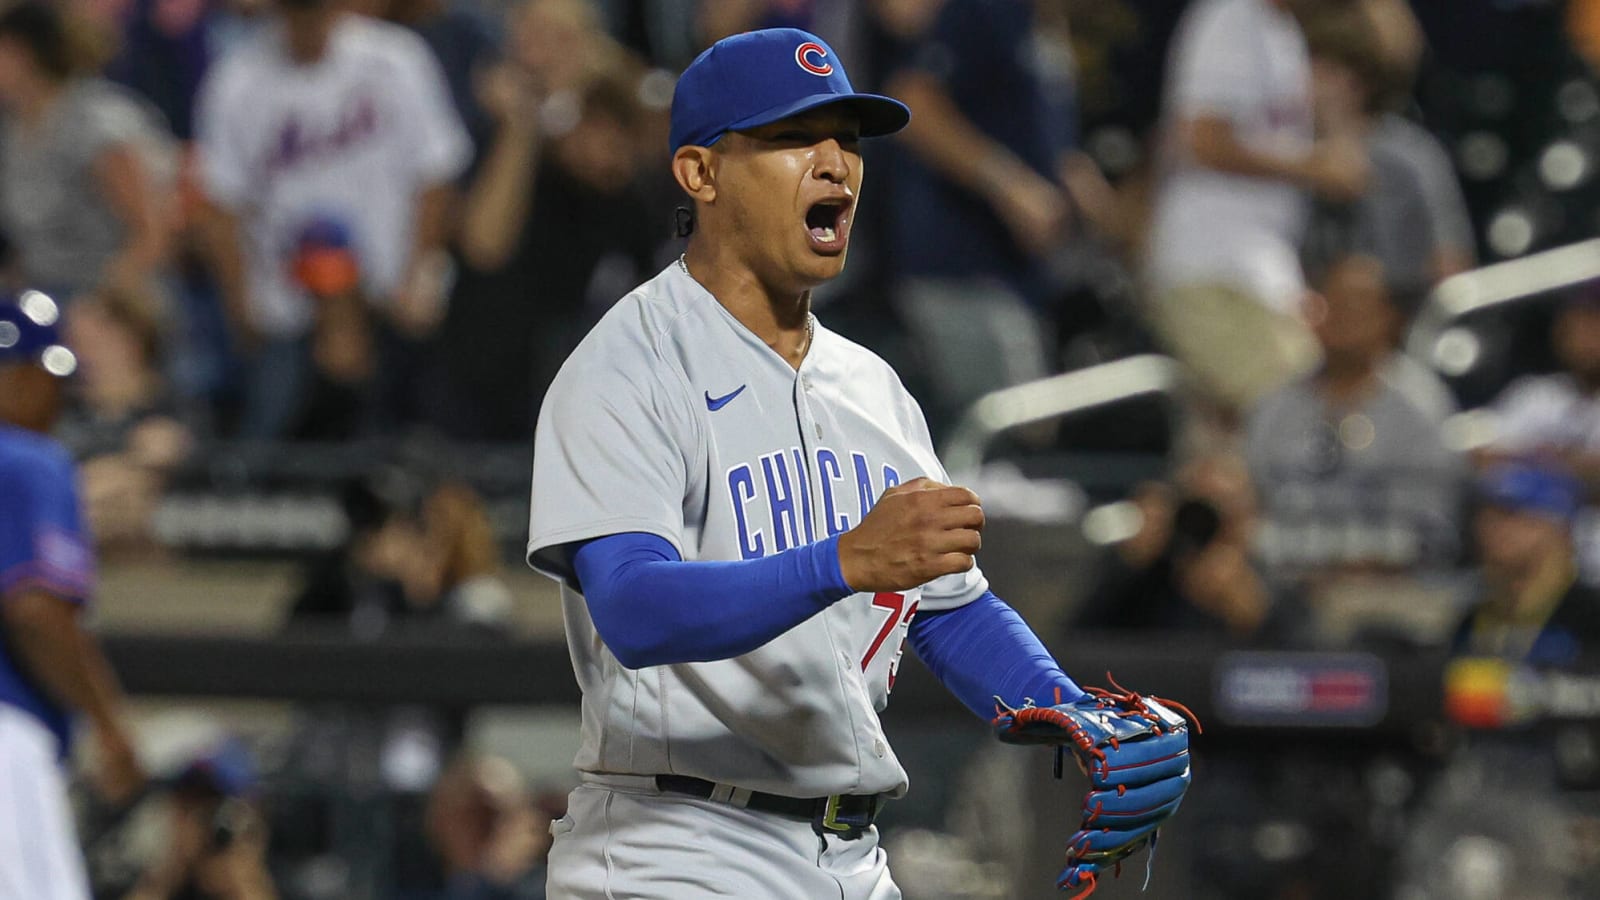 Adbert Alzolay: The Chicago Cubs Closer Of The Future?